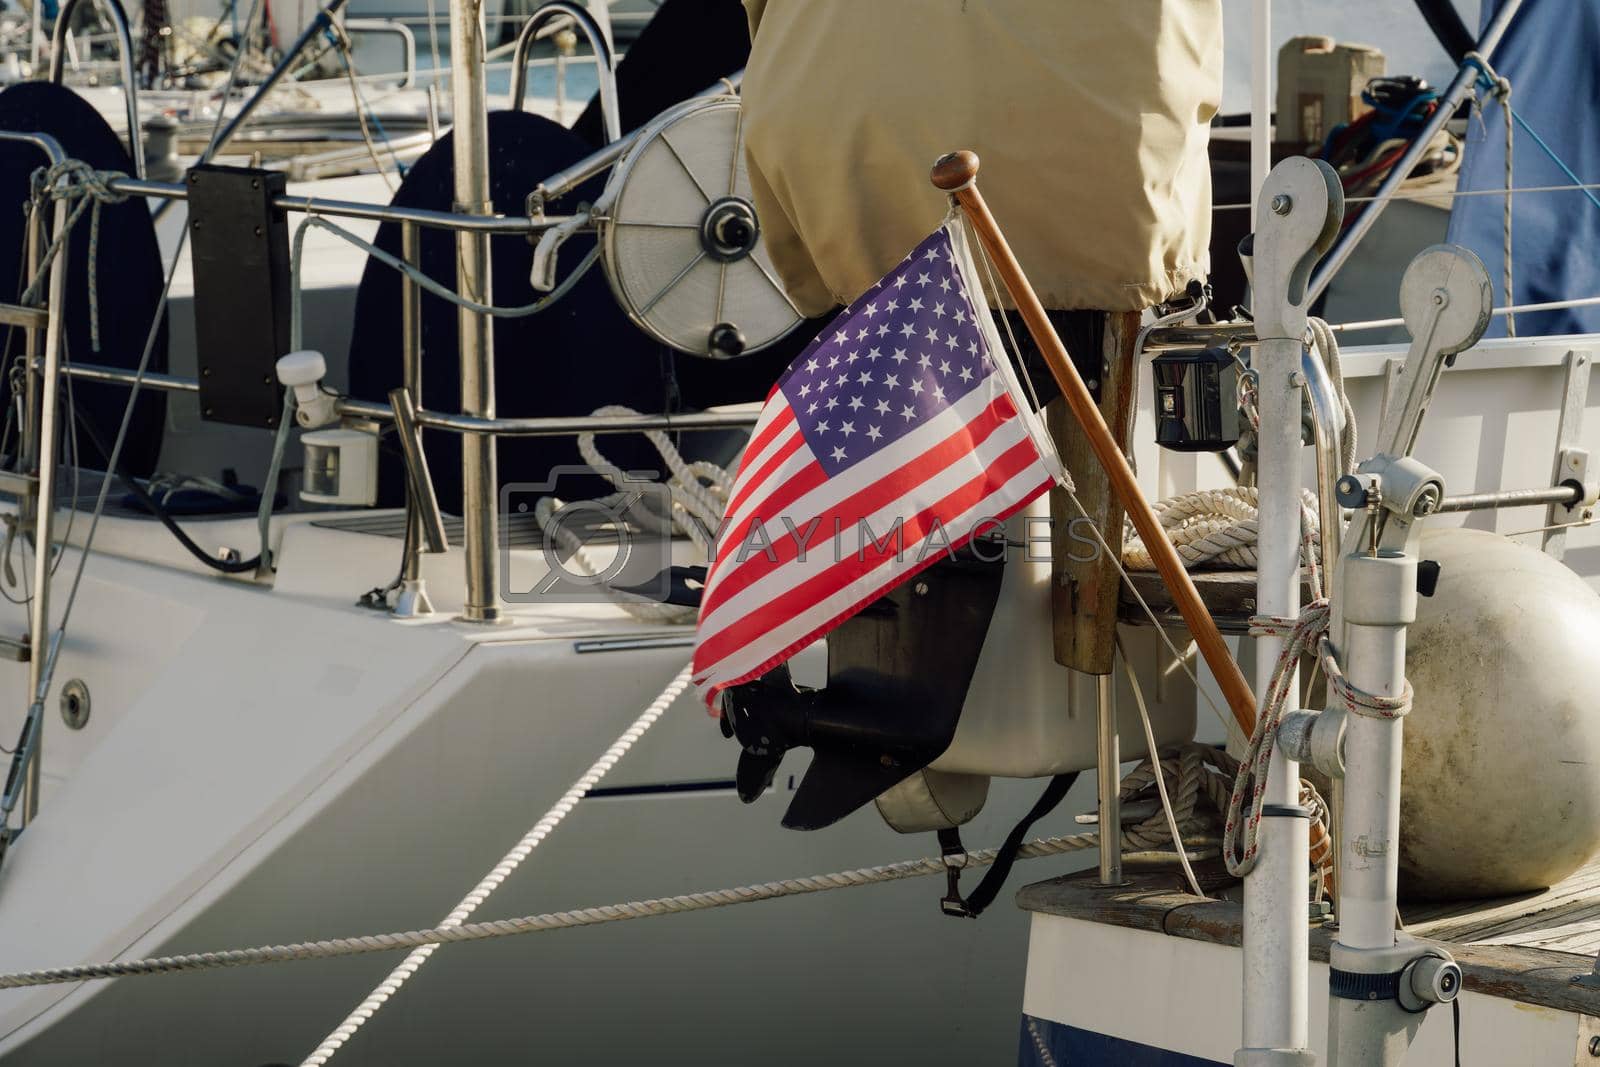 Royalty free image of United States American national flag on the back of a moored boat. by bestravelvideo